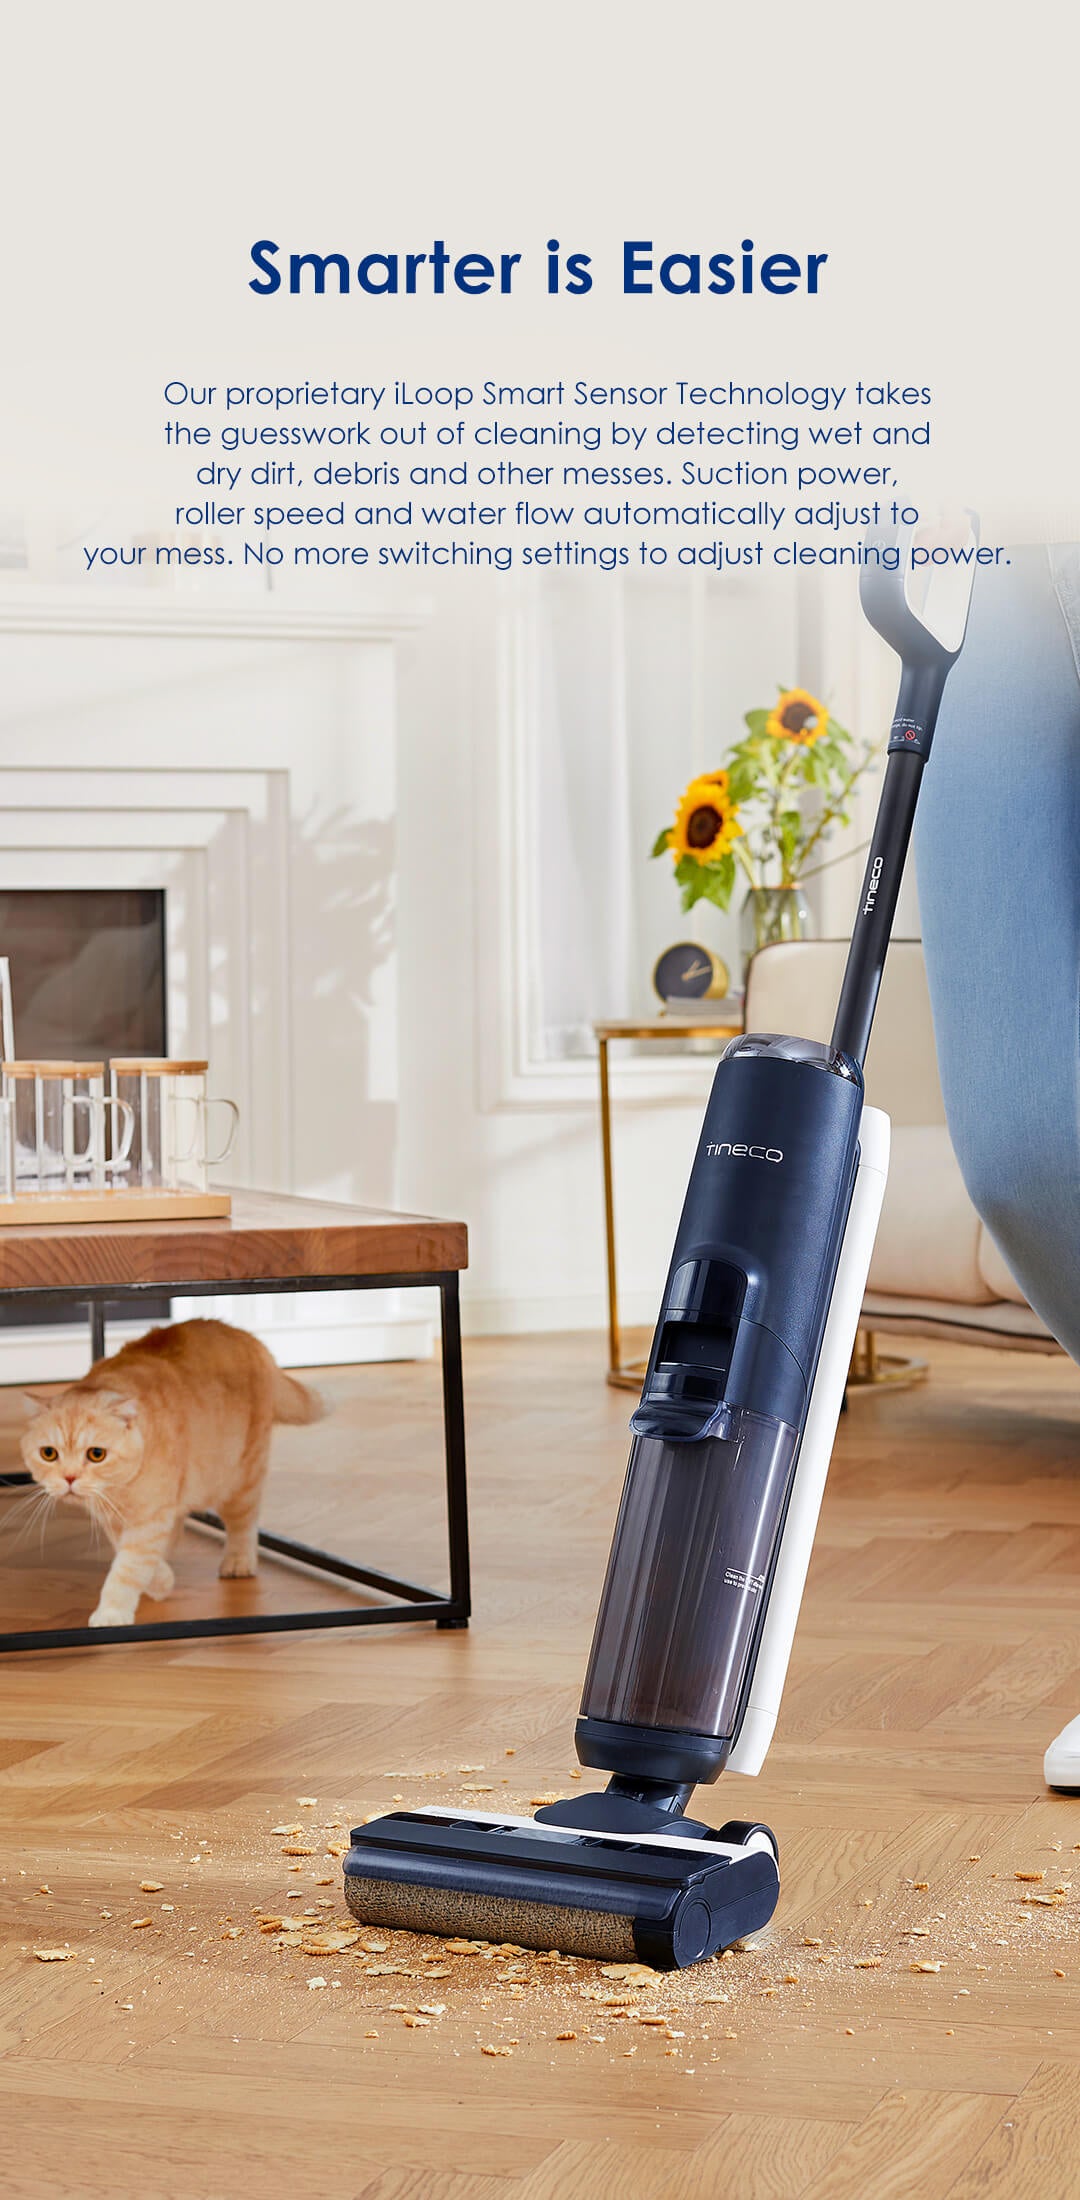 TINECO FLOOR ONE S5 VACUUM CLEANER THAT VACUUMS EVERYTHING!!! A MUST SEE 